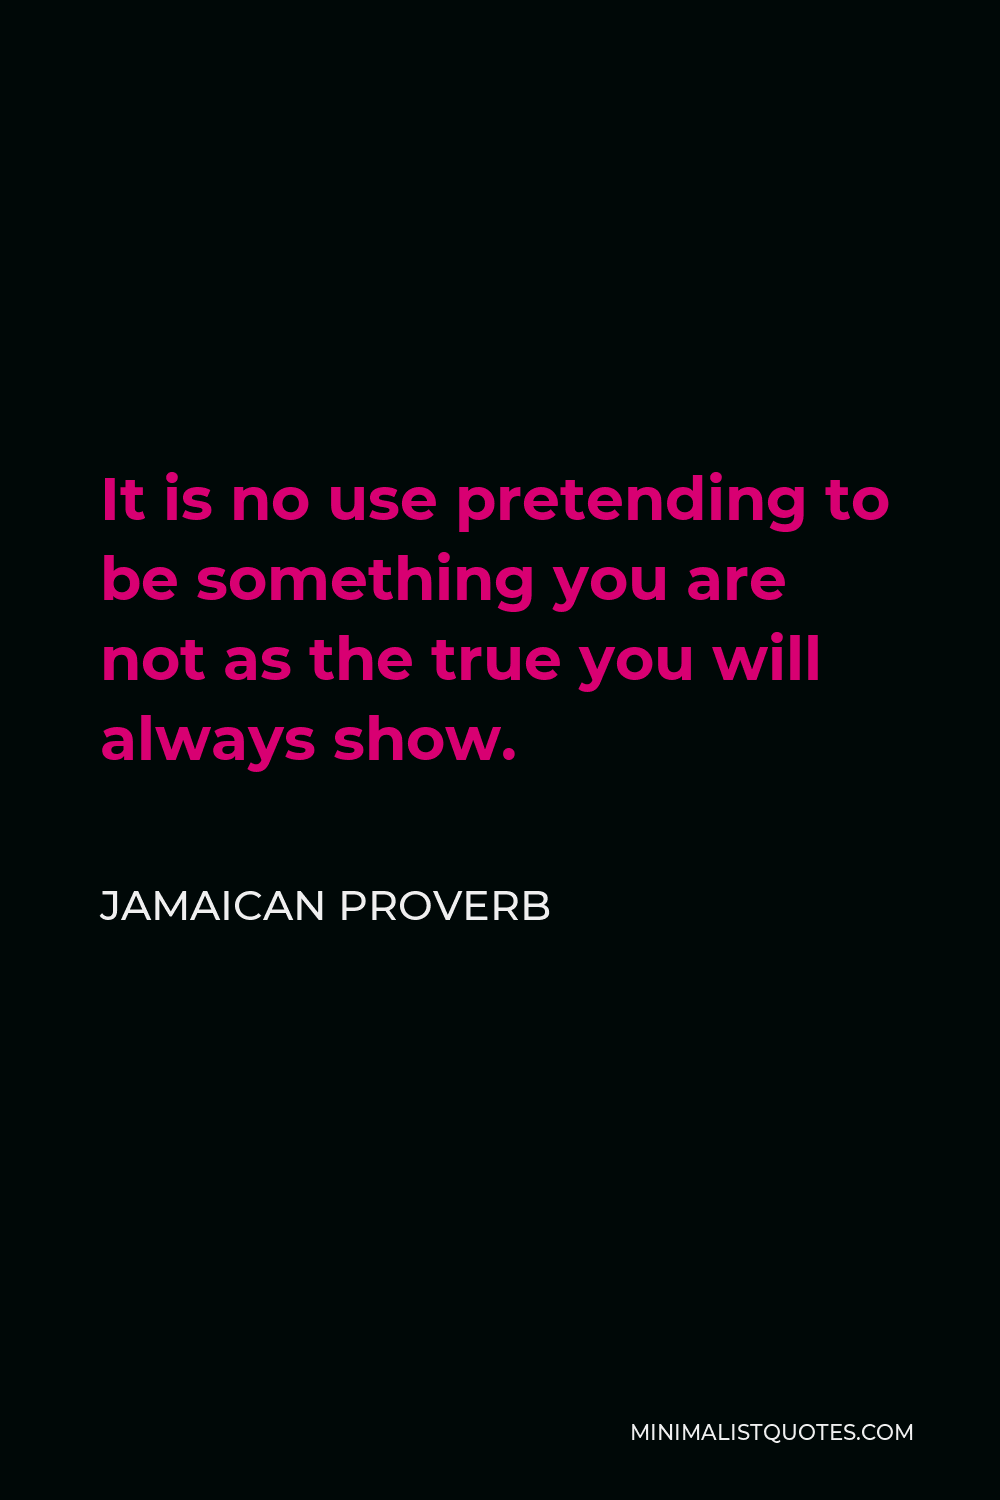 Jamaican Proverb Quote - It is no use pretending to be something you are not as the true you will always show.